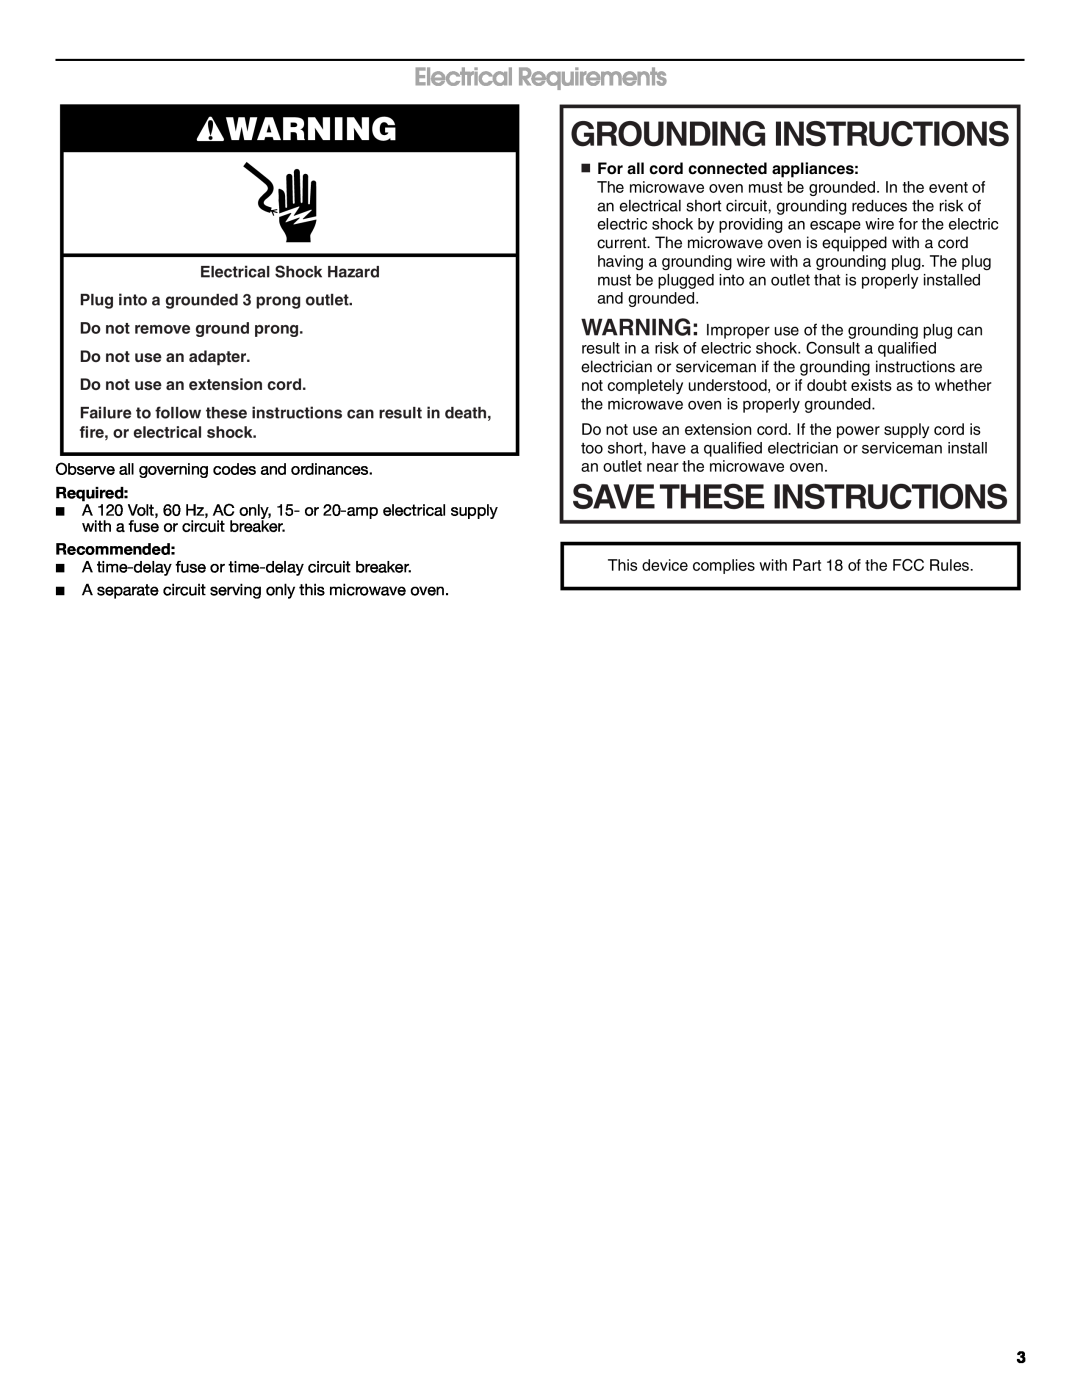 Jenn-Air W10259841B Grounding Instructions, Electrical Requirements, Save These Instructions, Required, Recommended 